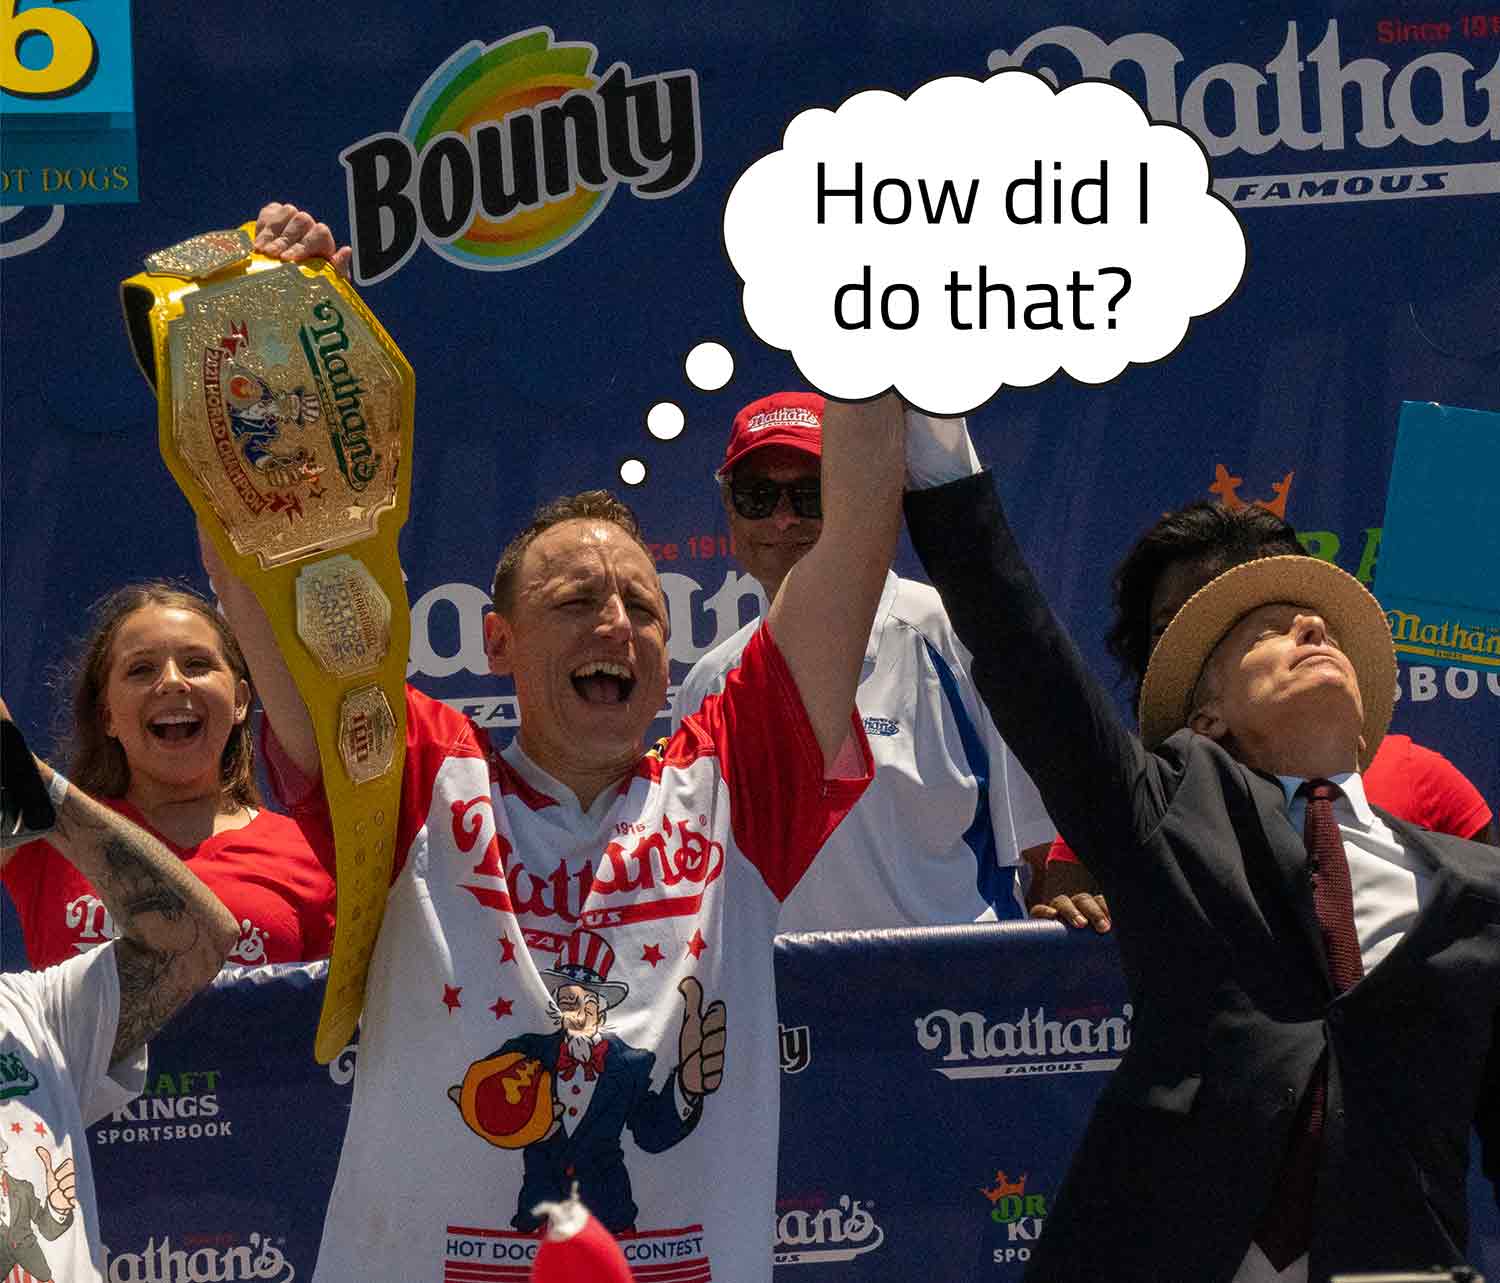 Joey Chestnut smiling and holding up a championship belt that says Nathan’s with a thought bubble that says How did I do that.